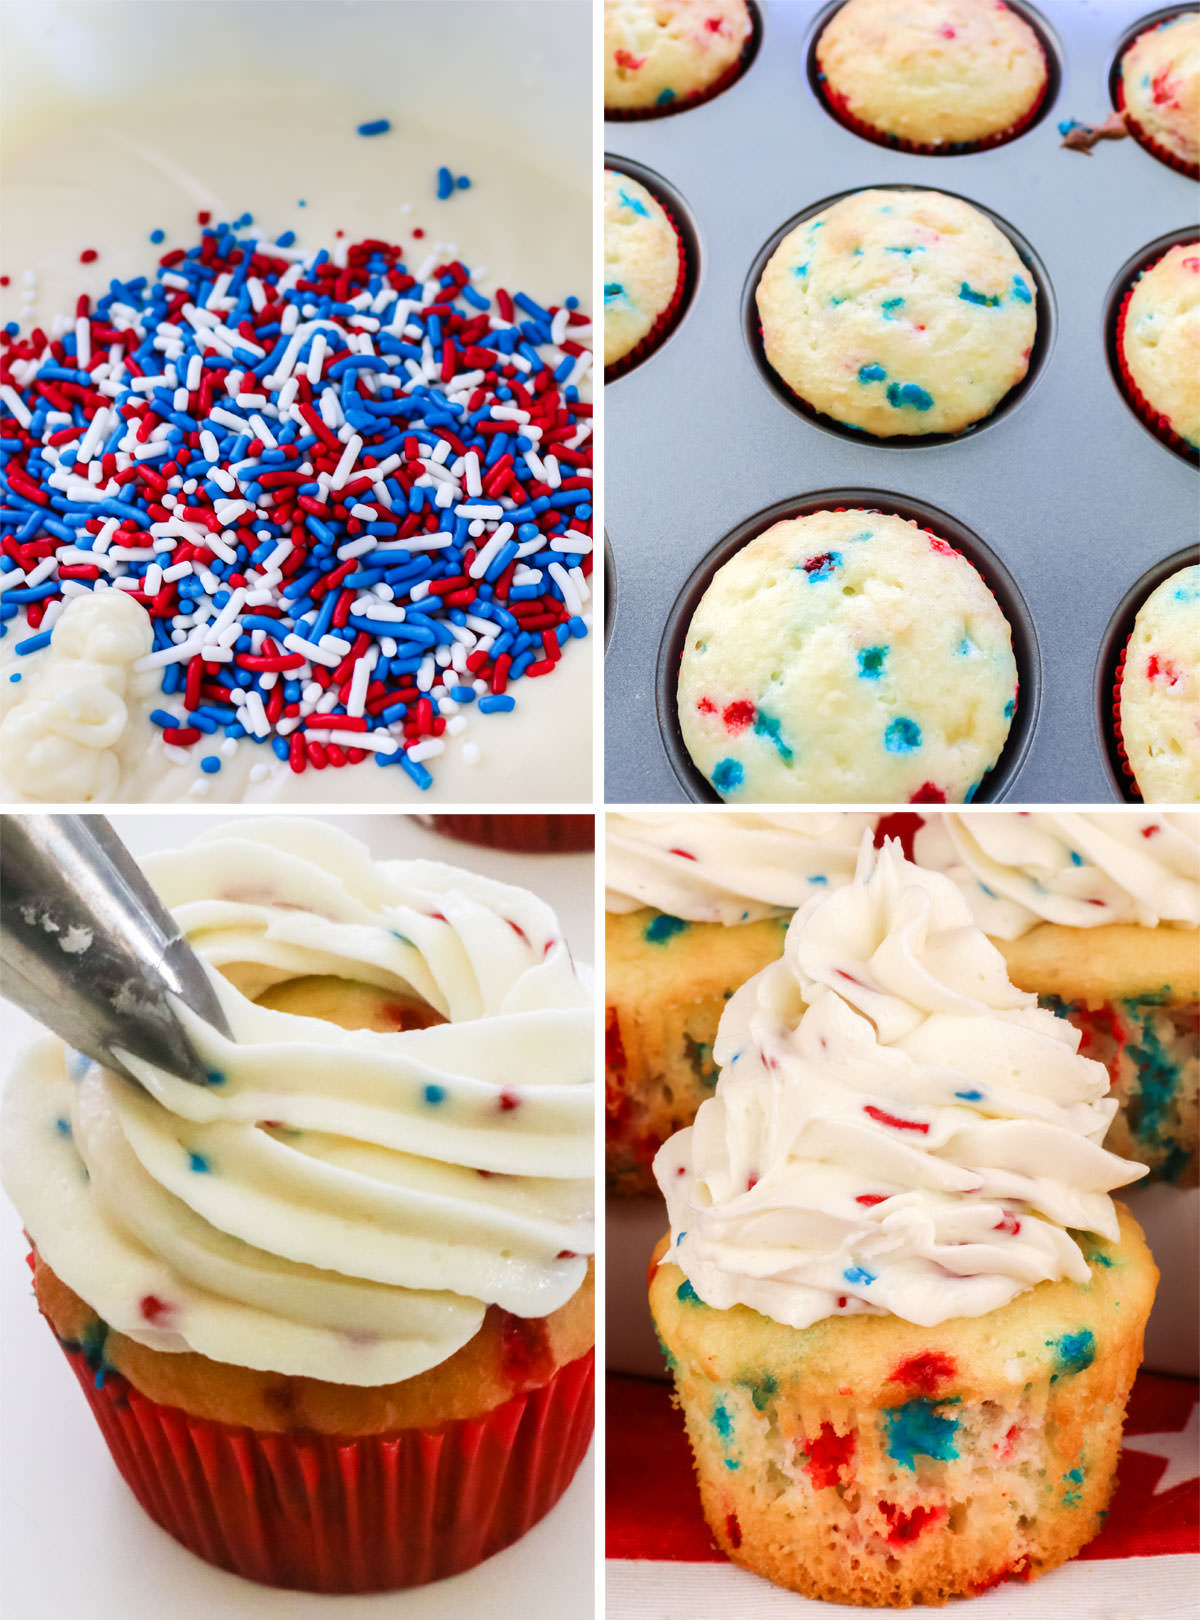 Collage image showing the steps necessary to create Red White and Blue Confetti Cupcakes for 4th of July.